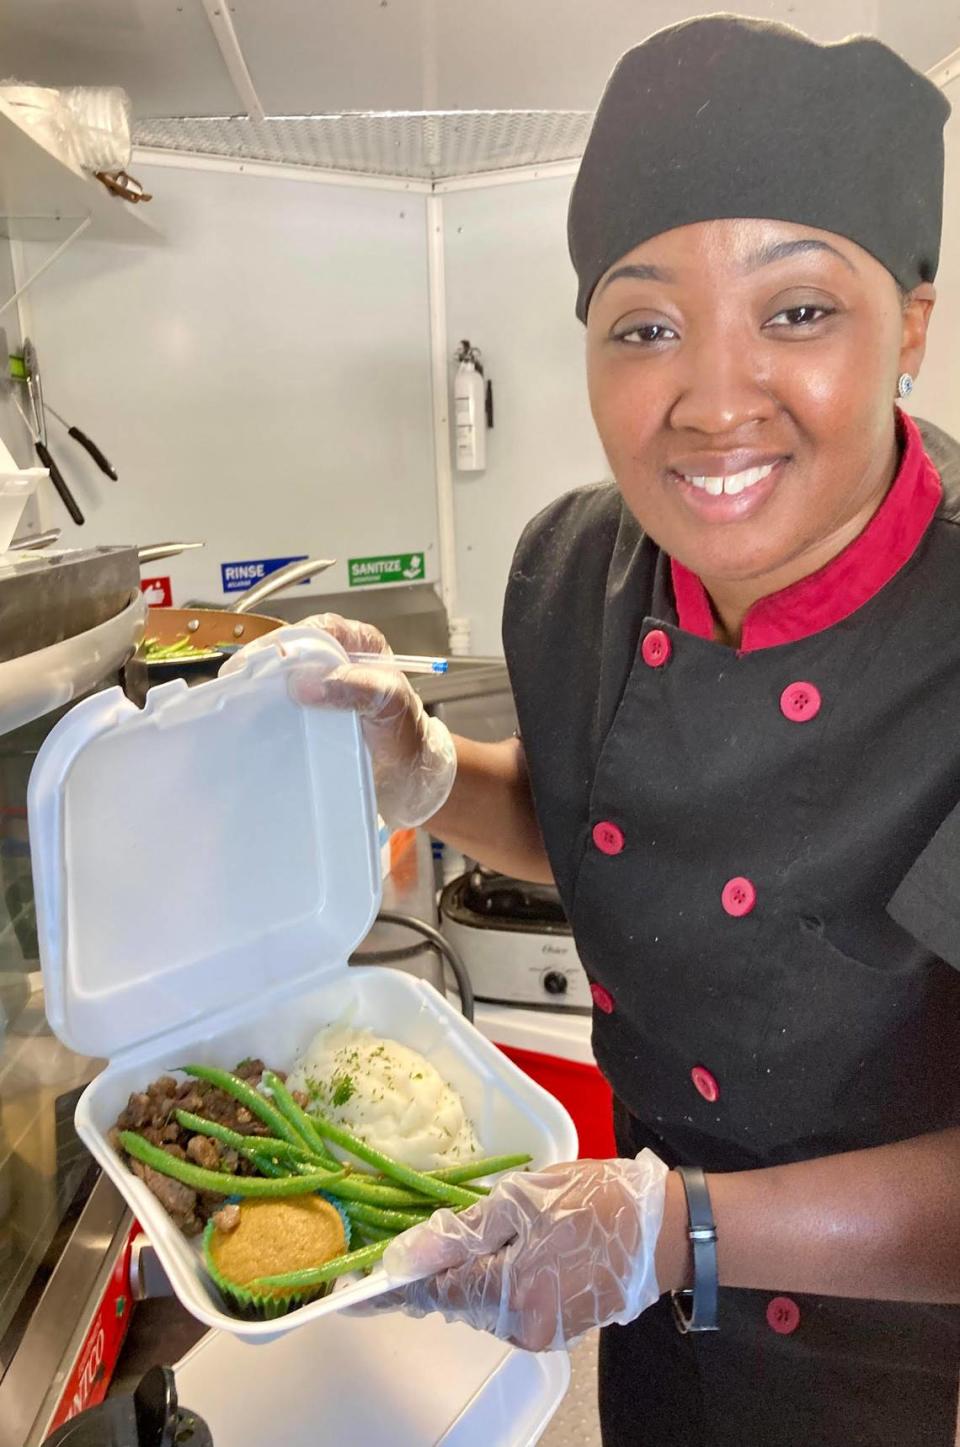 Dee Glover serves up ribeye steak strips served with mashed potatoes, sauteed green beans and brown sugar cornbread from the Signature Flavors Cafe & Catering food truck she owns with her husband, Ronnie.